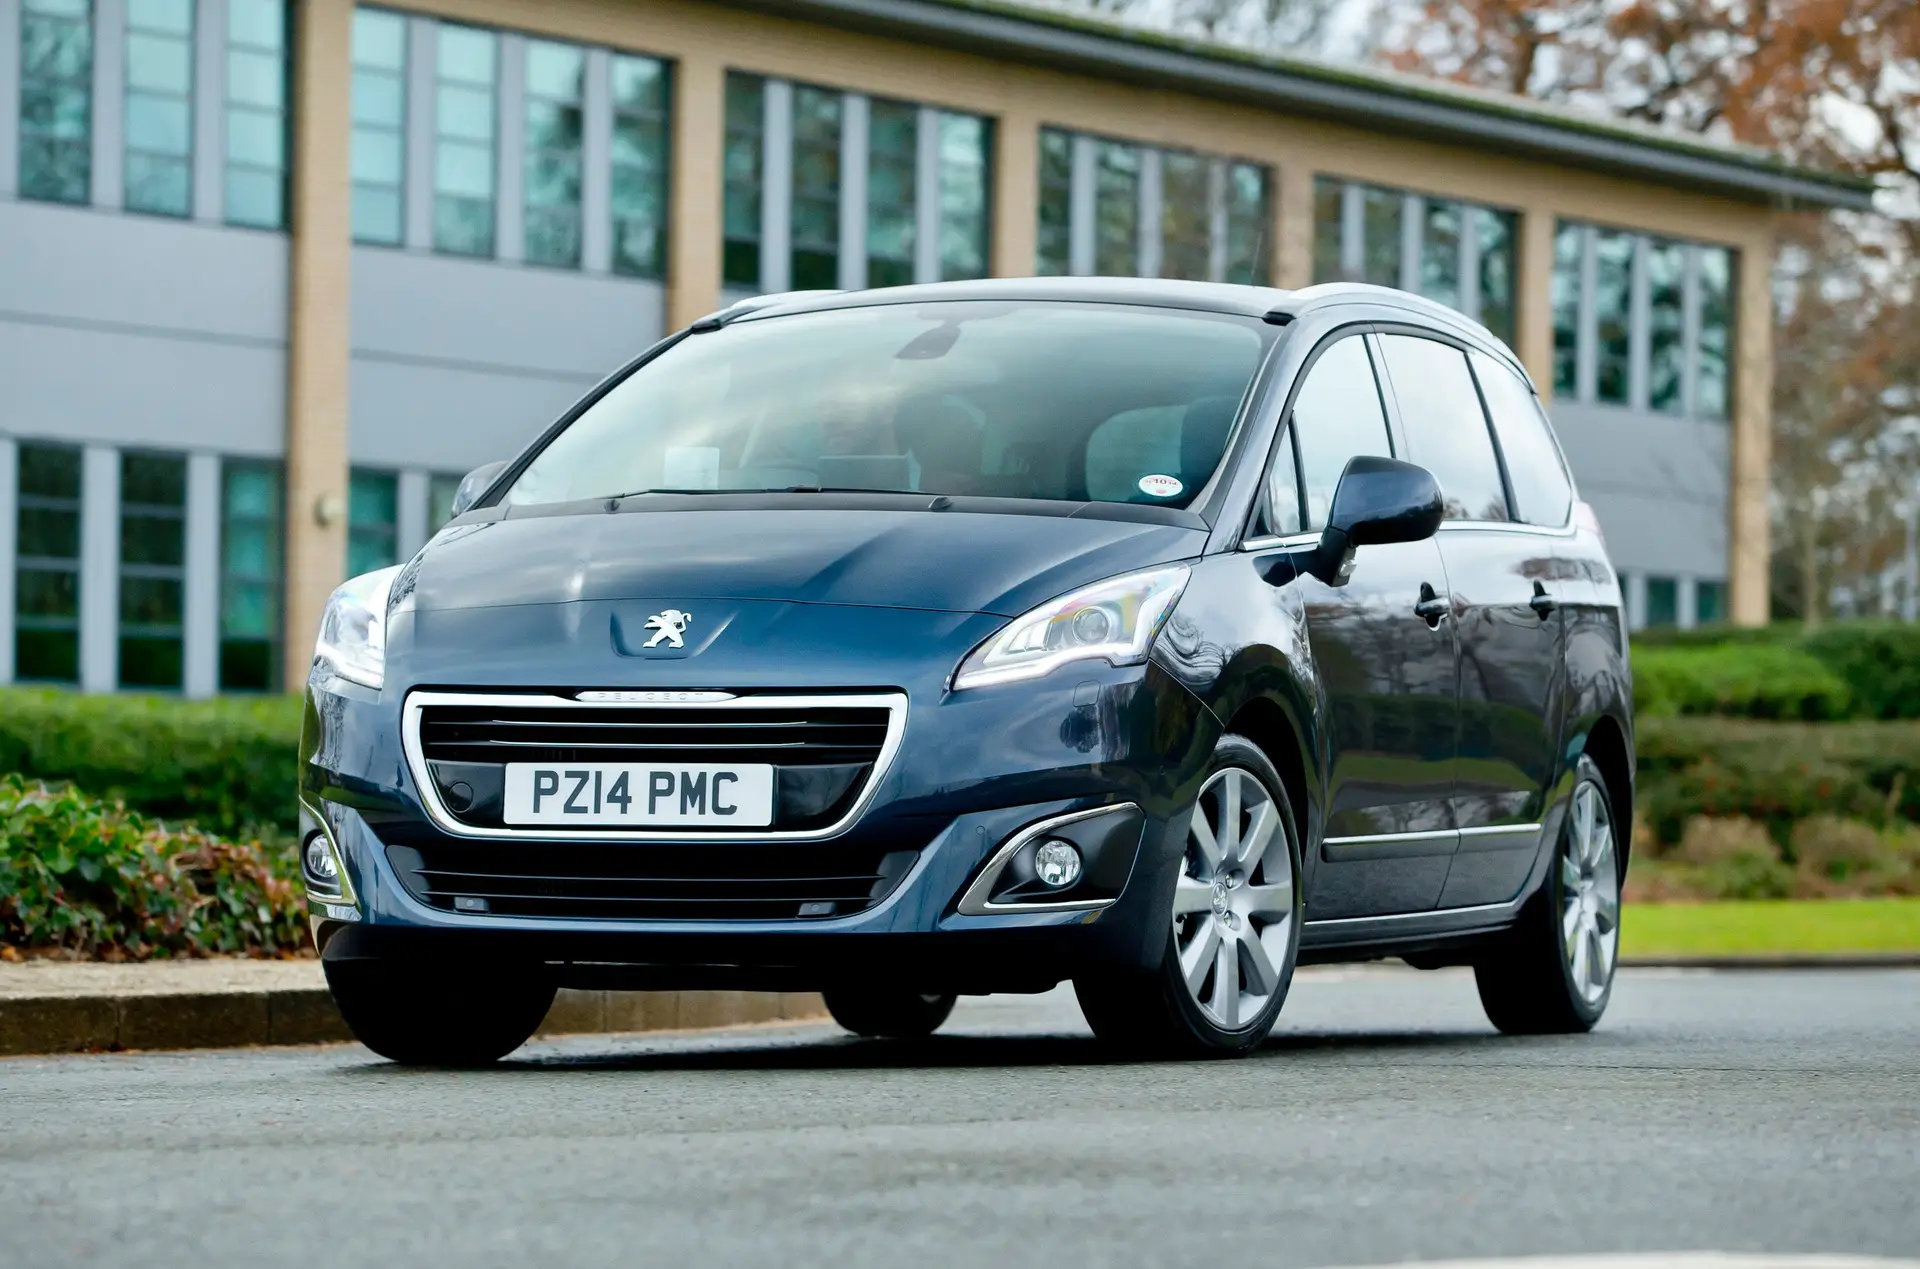 Peugeot 5008 (2010-2018) Review: exterior front three quarter photo of the Peugeot 5008 on the road